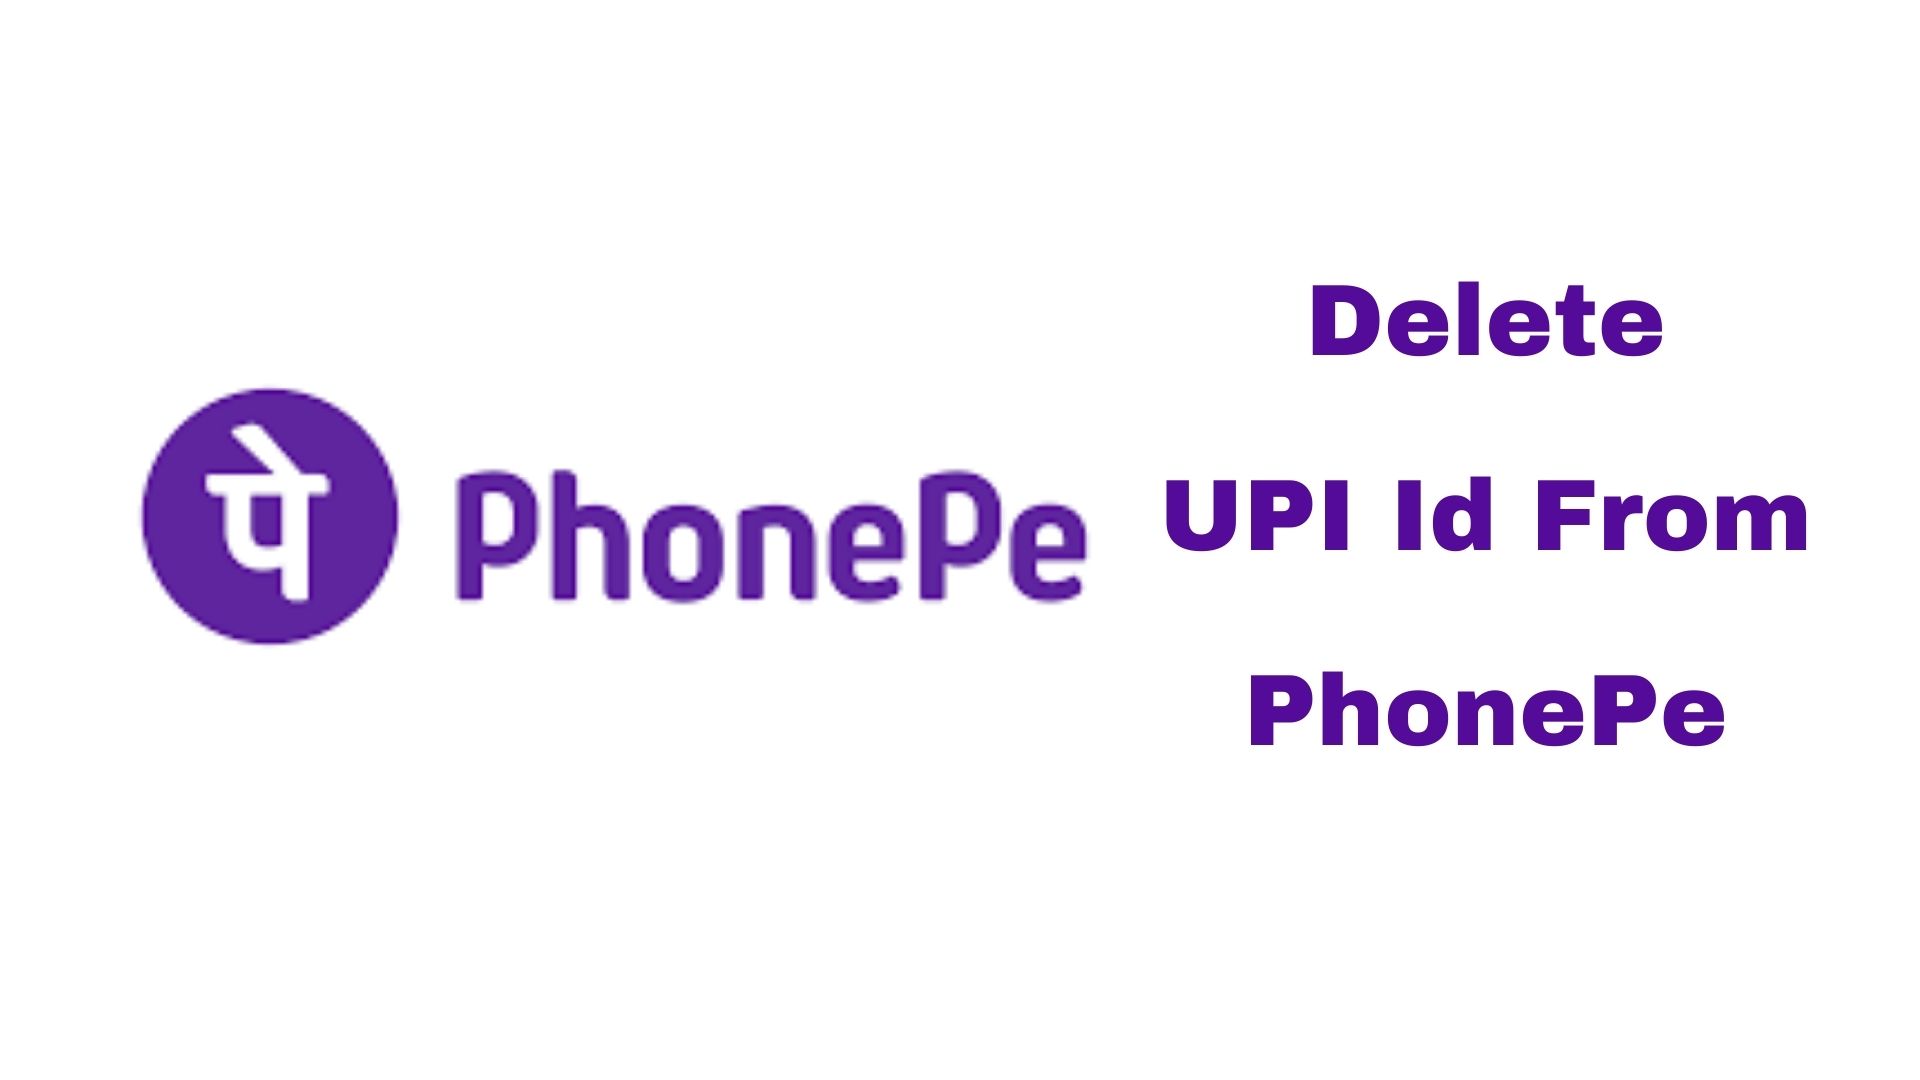 How To Delete UPI Id In PhonePe?